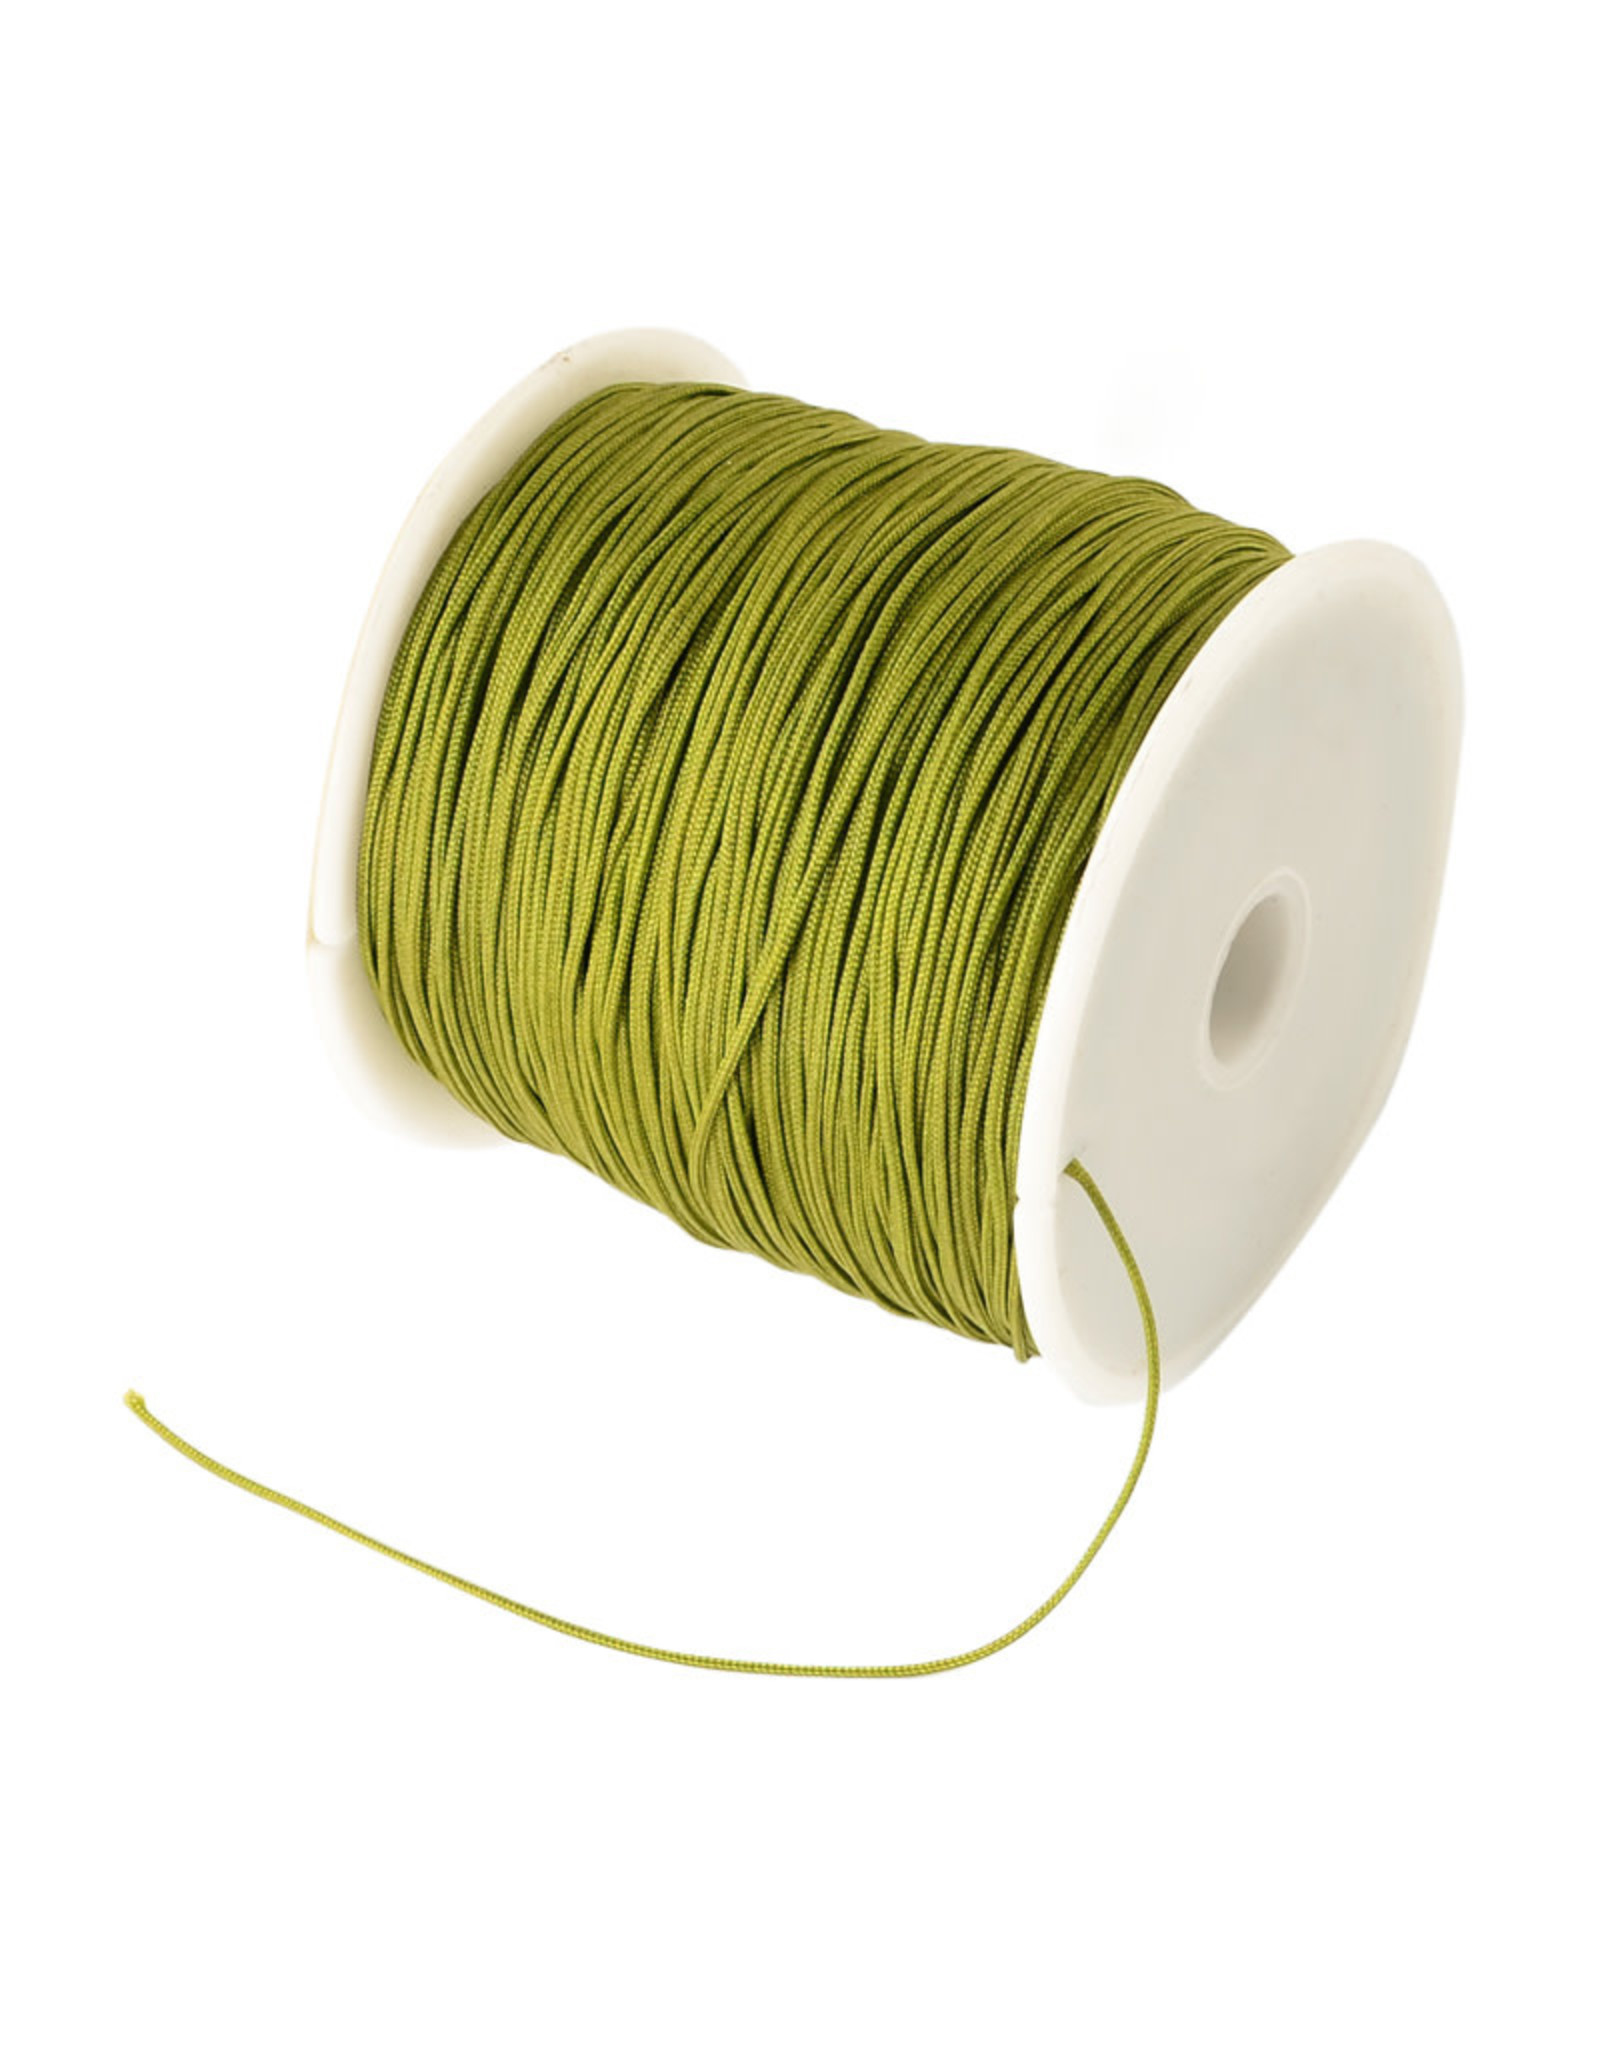 Chinese Knotting Cord .8mm Olive Green x100y